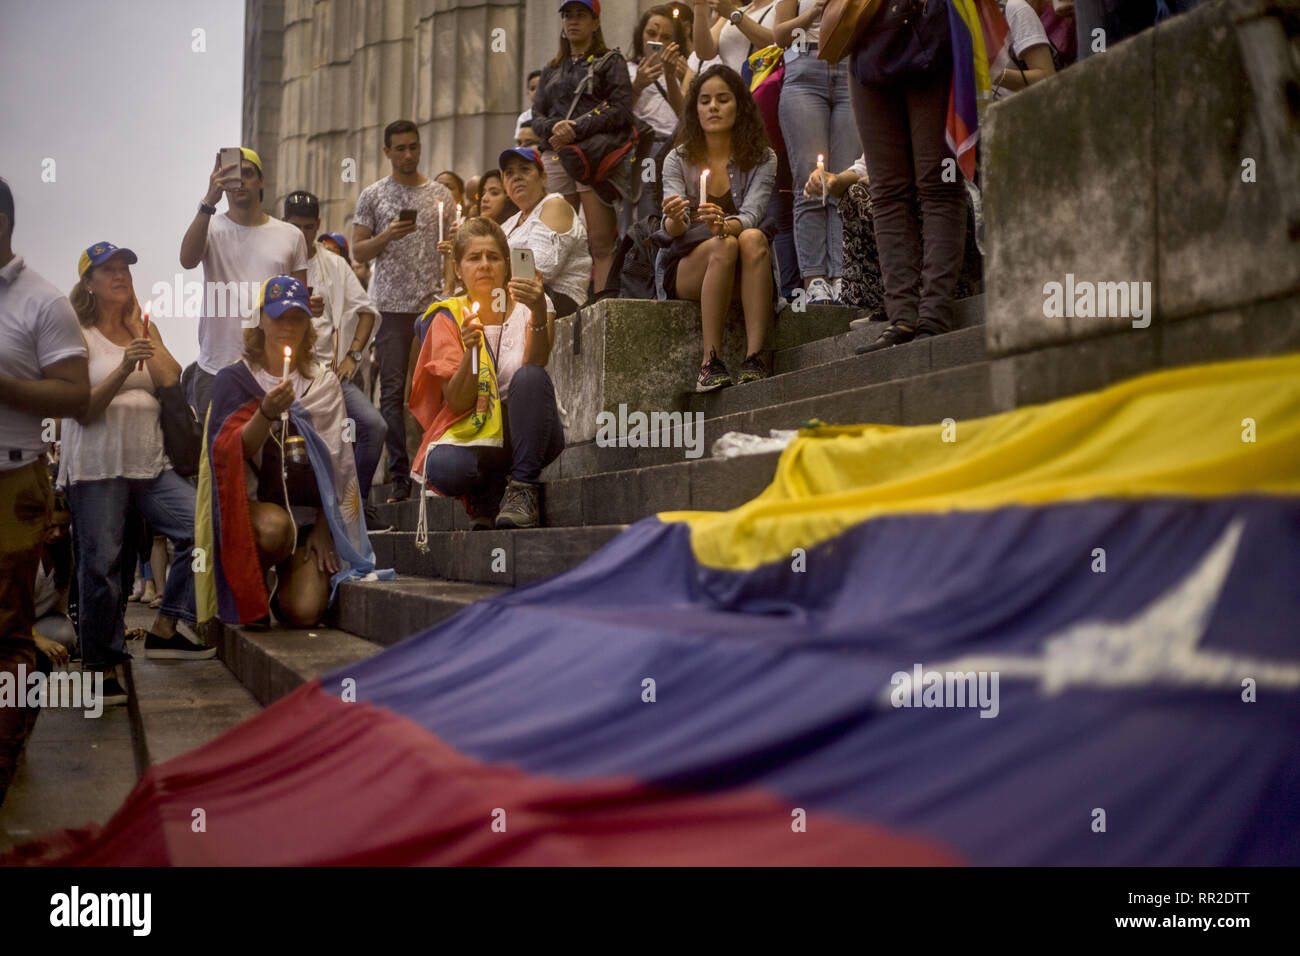 Buenos Aires, Federal Capital, Argentina. 23rd Feb, 2019. Venezuelan migrants residing in the City of Buenos Aires, Argentina, are concentrated in the Faculty of Law of the University of Buenos Aires to hold a vigil in support of Juan GuaidÃ³ and the humanitarian aid that he expects in the Venezuelan borders with Brazil and Colombia to enter to Venezuela amid heavy clashes between Venezuelan security forces and demonstrators. Credit: Roberto Almeida Aveledo/ZUMA Wire/Alamy Live News Stock Photo